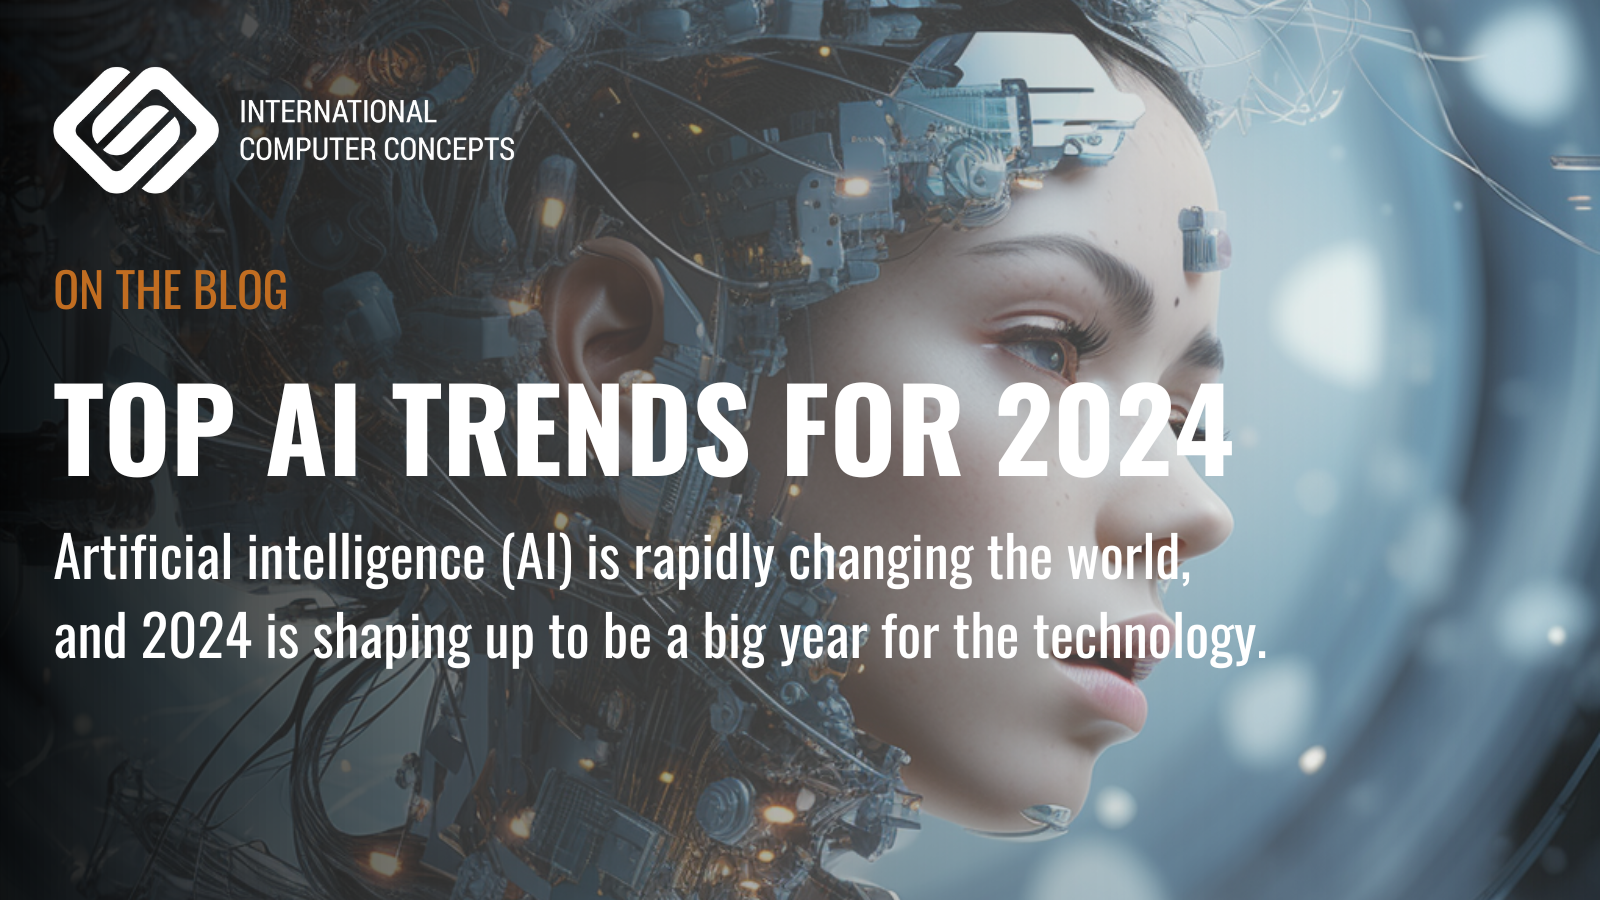 Top AI Trends for 2024